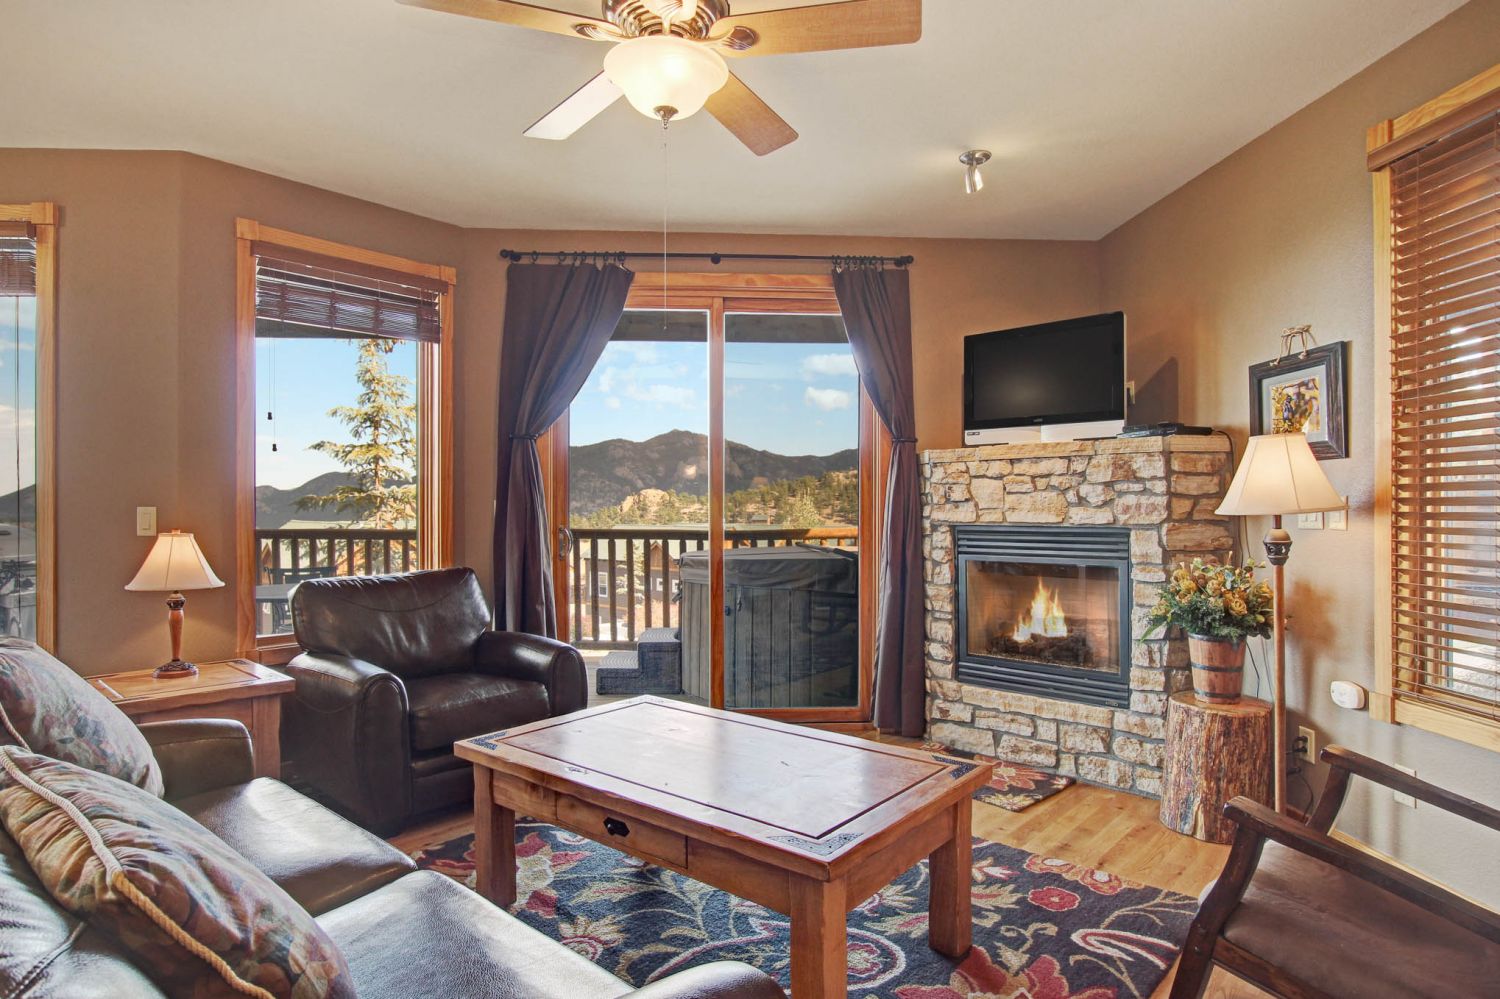 Sheep Mountain 20B - Door opens to this open concept living room/kitchen area, with amazing views all around. 